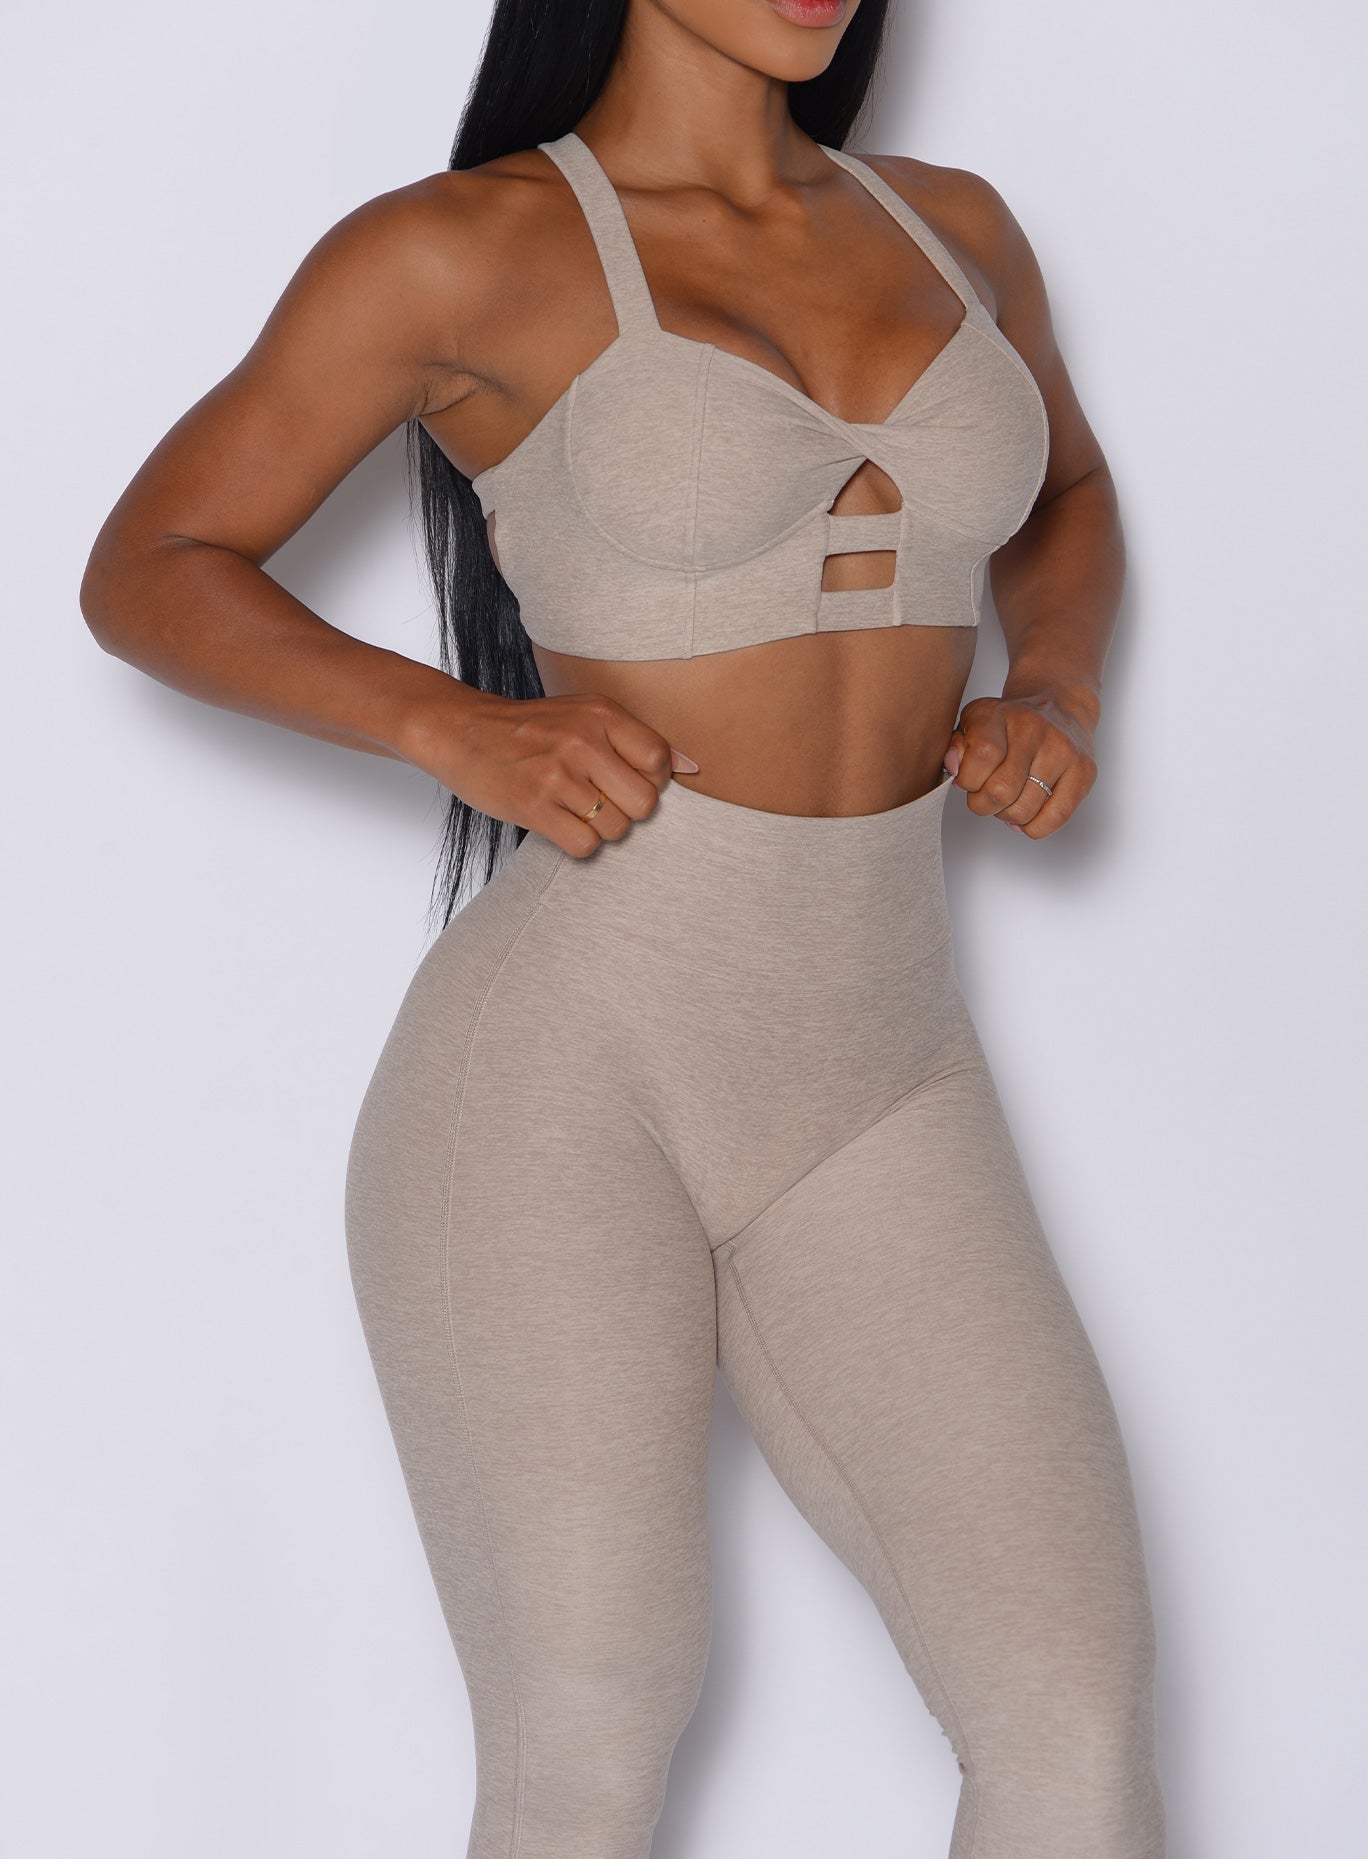 front profile picture of a model wearing our core set bra in taupe color along with the matching leggings